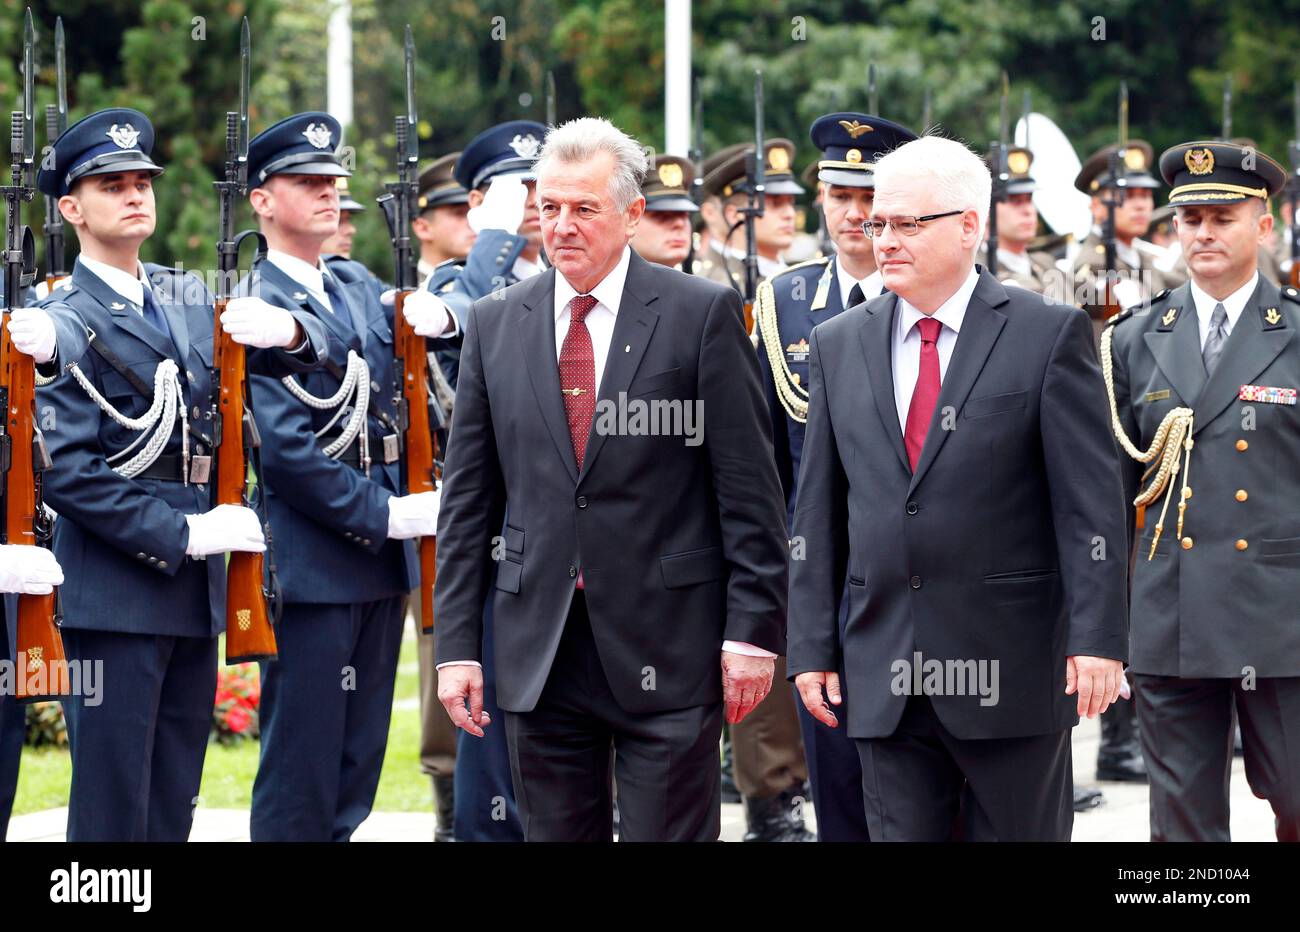 Hungary's president Pal Schmitt, left, and his Croatian counterpart Ivo Josipovic review guards of honor during an arrival ceremony in Zagreb, Croatia, Friday, Oct. 1, 2010. President Schmitt is on a single day official visit to Croatia. (AP Photo/Darko Bandic) Stock Photo